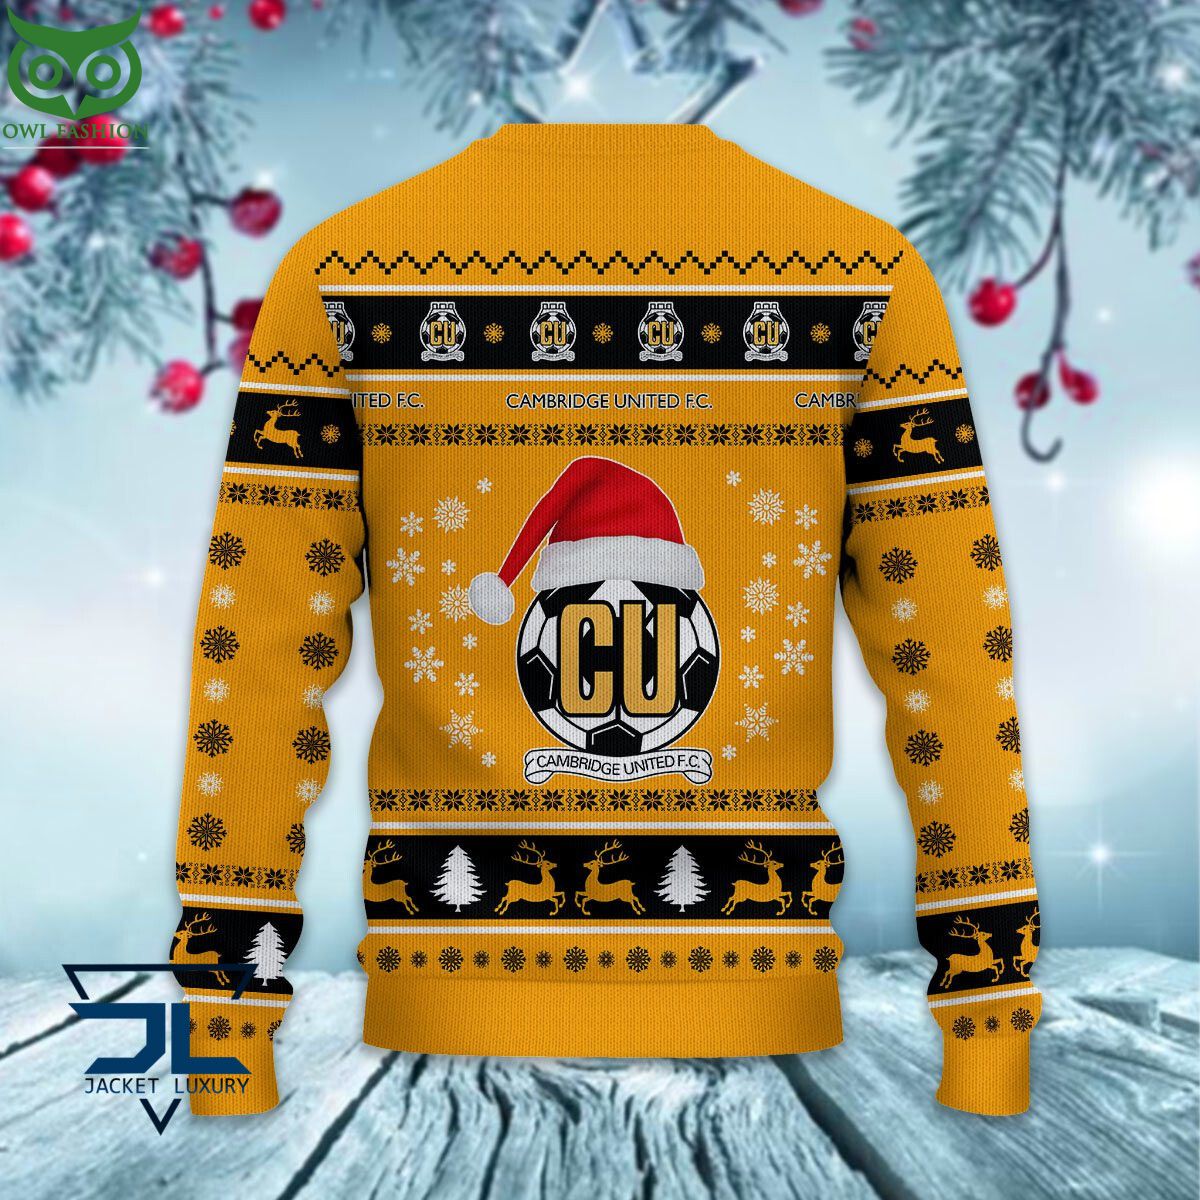 Cambridge United F.C EPL League Cup Ugly Sweater You are always best dear